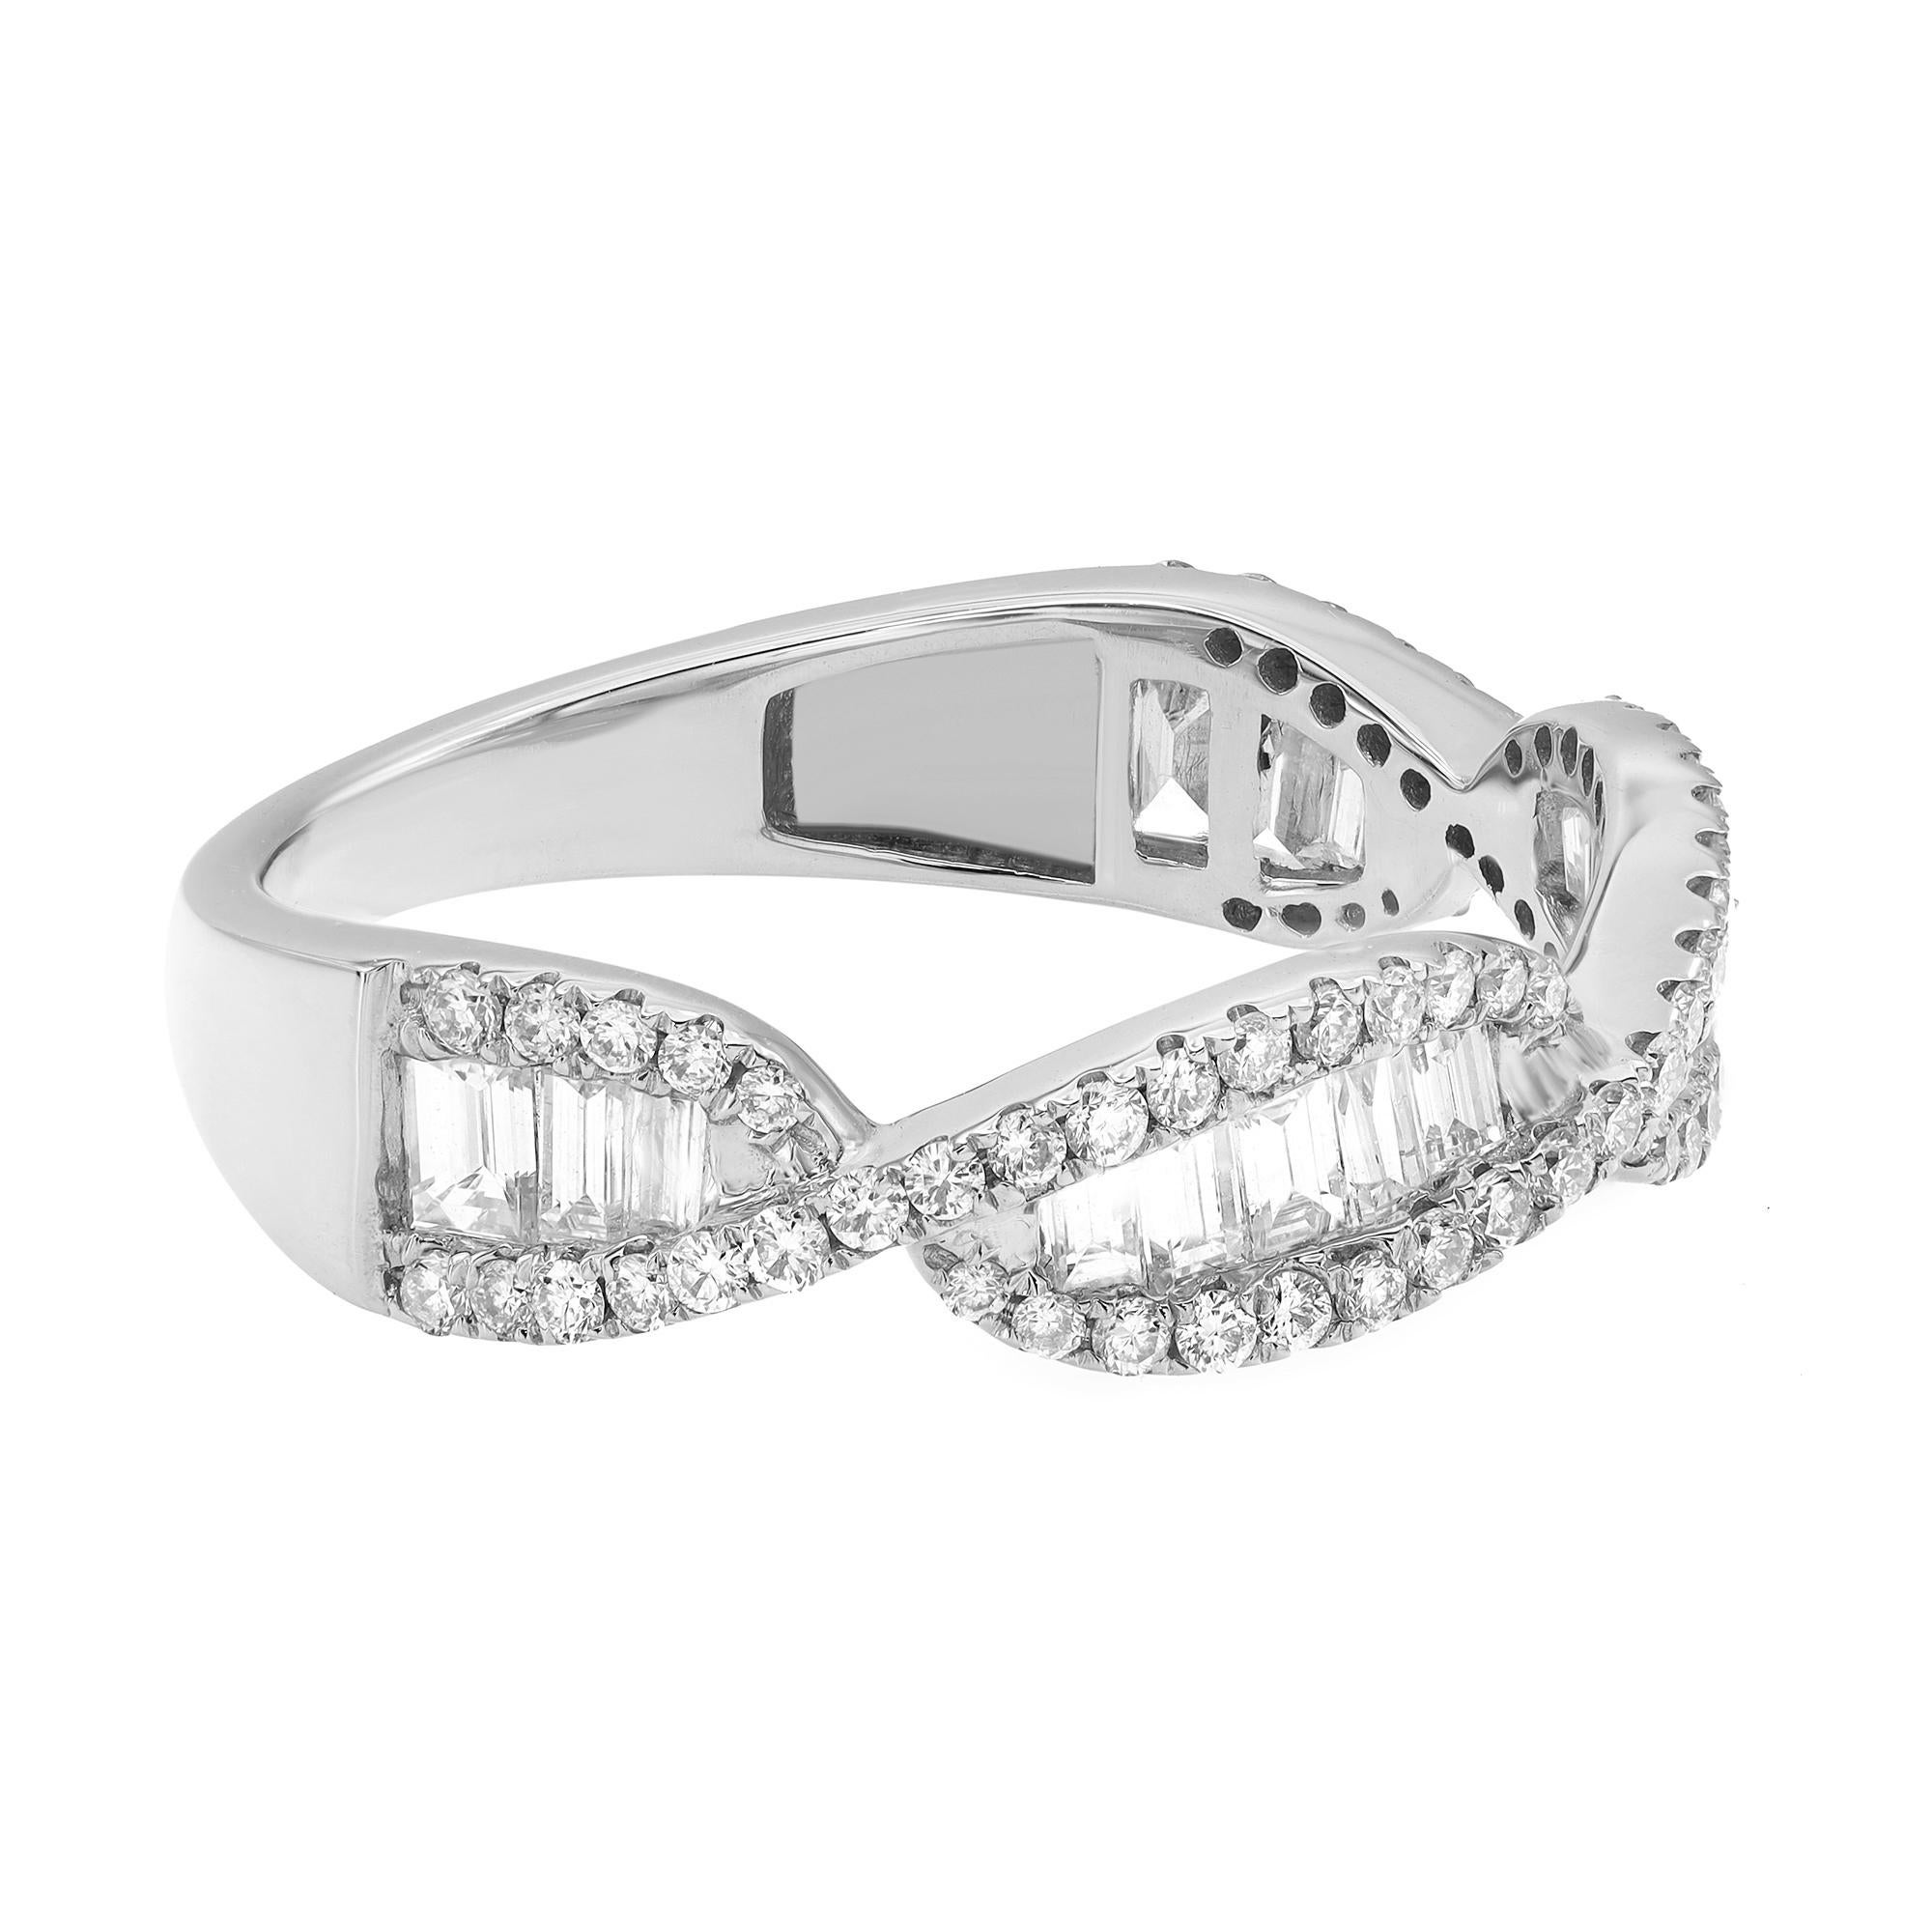 Simple and elegant, diamond twist wedding ring. Crafted in bright 18k white gold. It features two rows of petite pave set round brilliant-cut diamonds intertwined with center channel set baguette cut diamonds for a timeless, eye catching style.